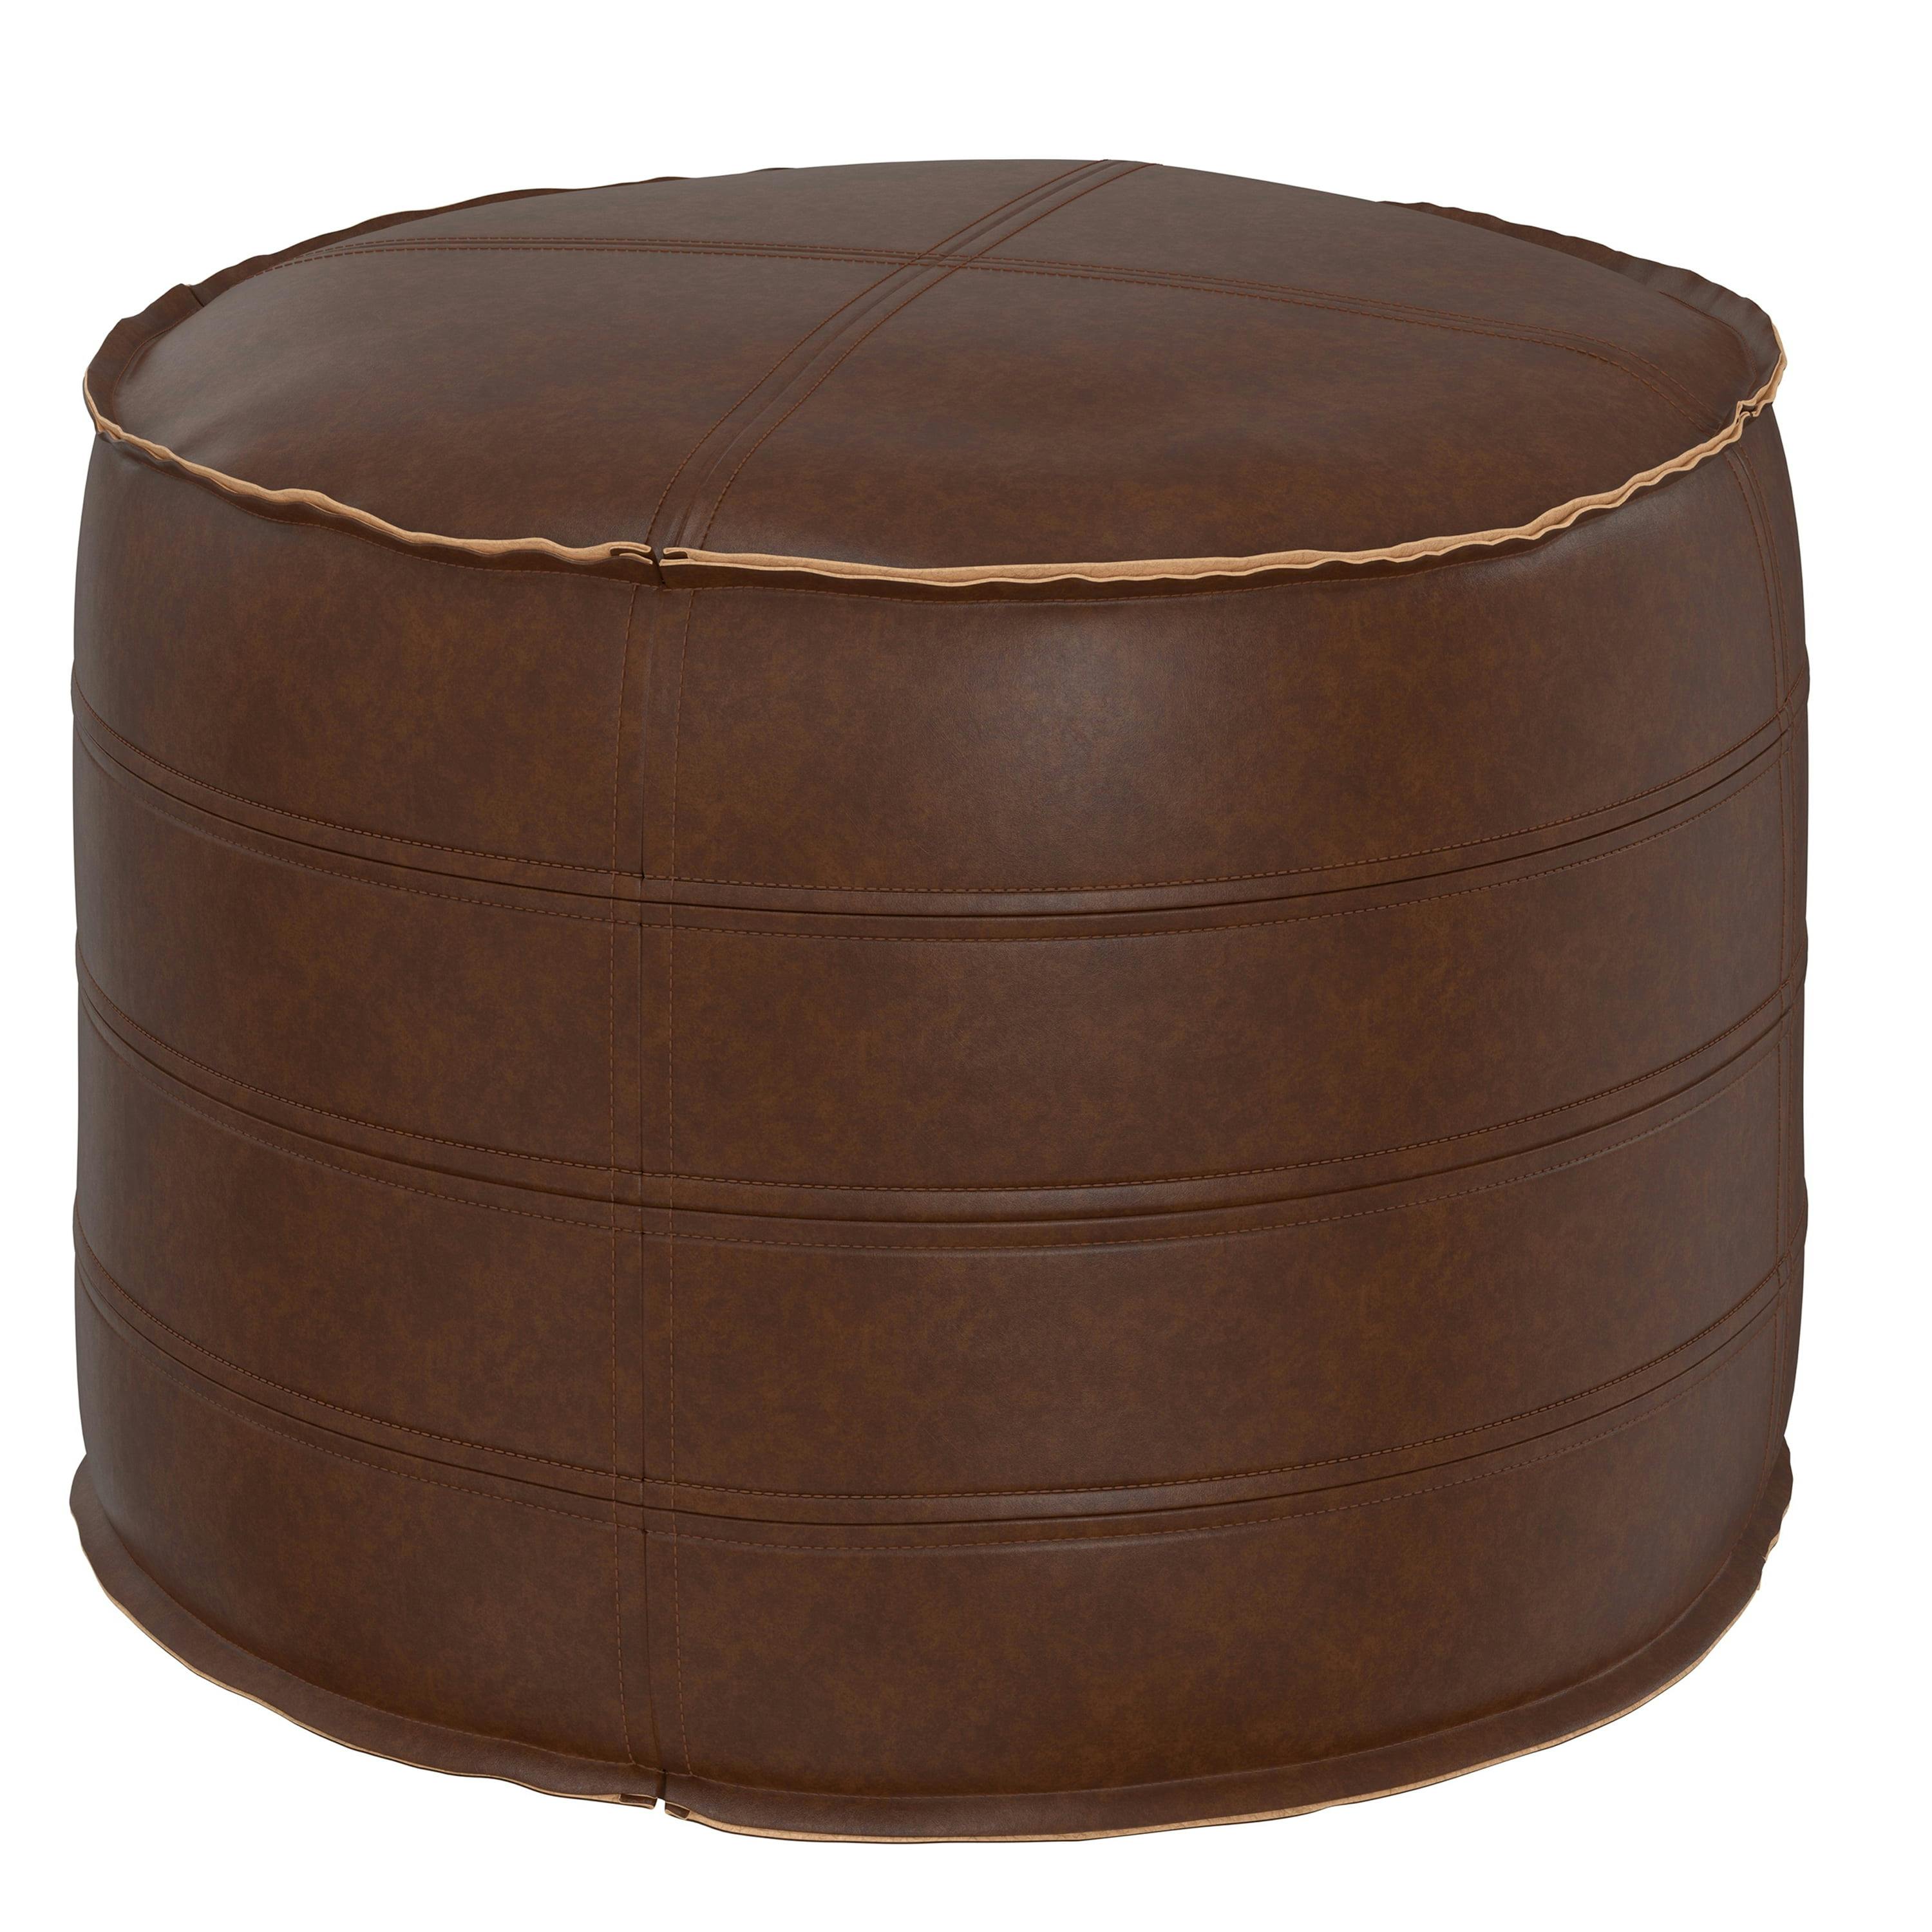 Brody Distressed Dark Brown Faux Leather Round Pouf, 20"